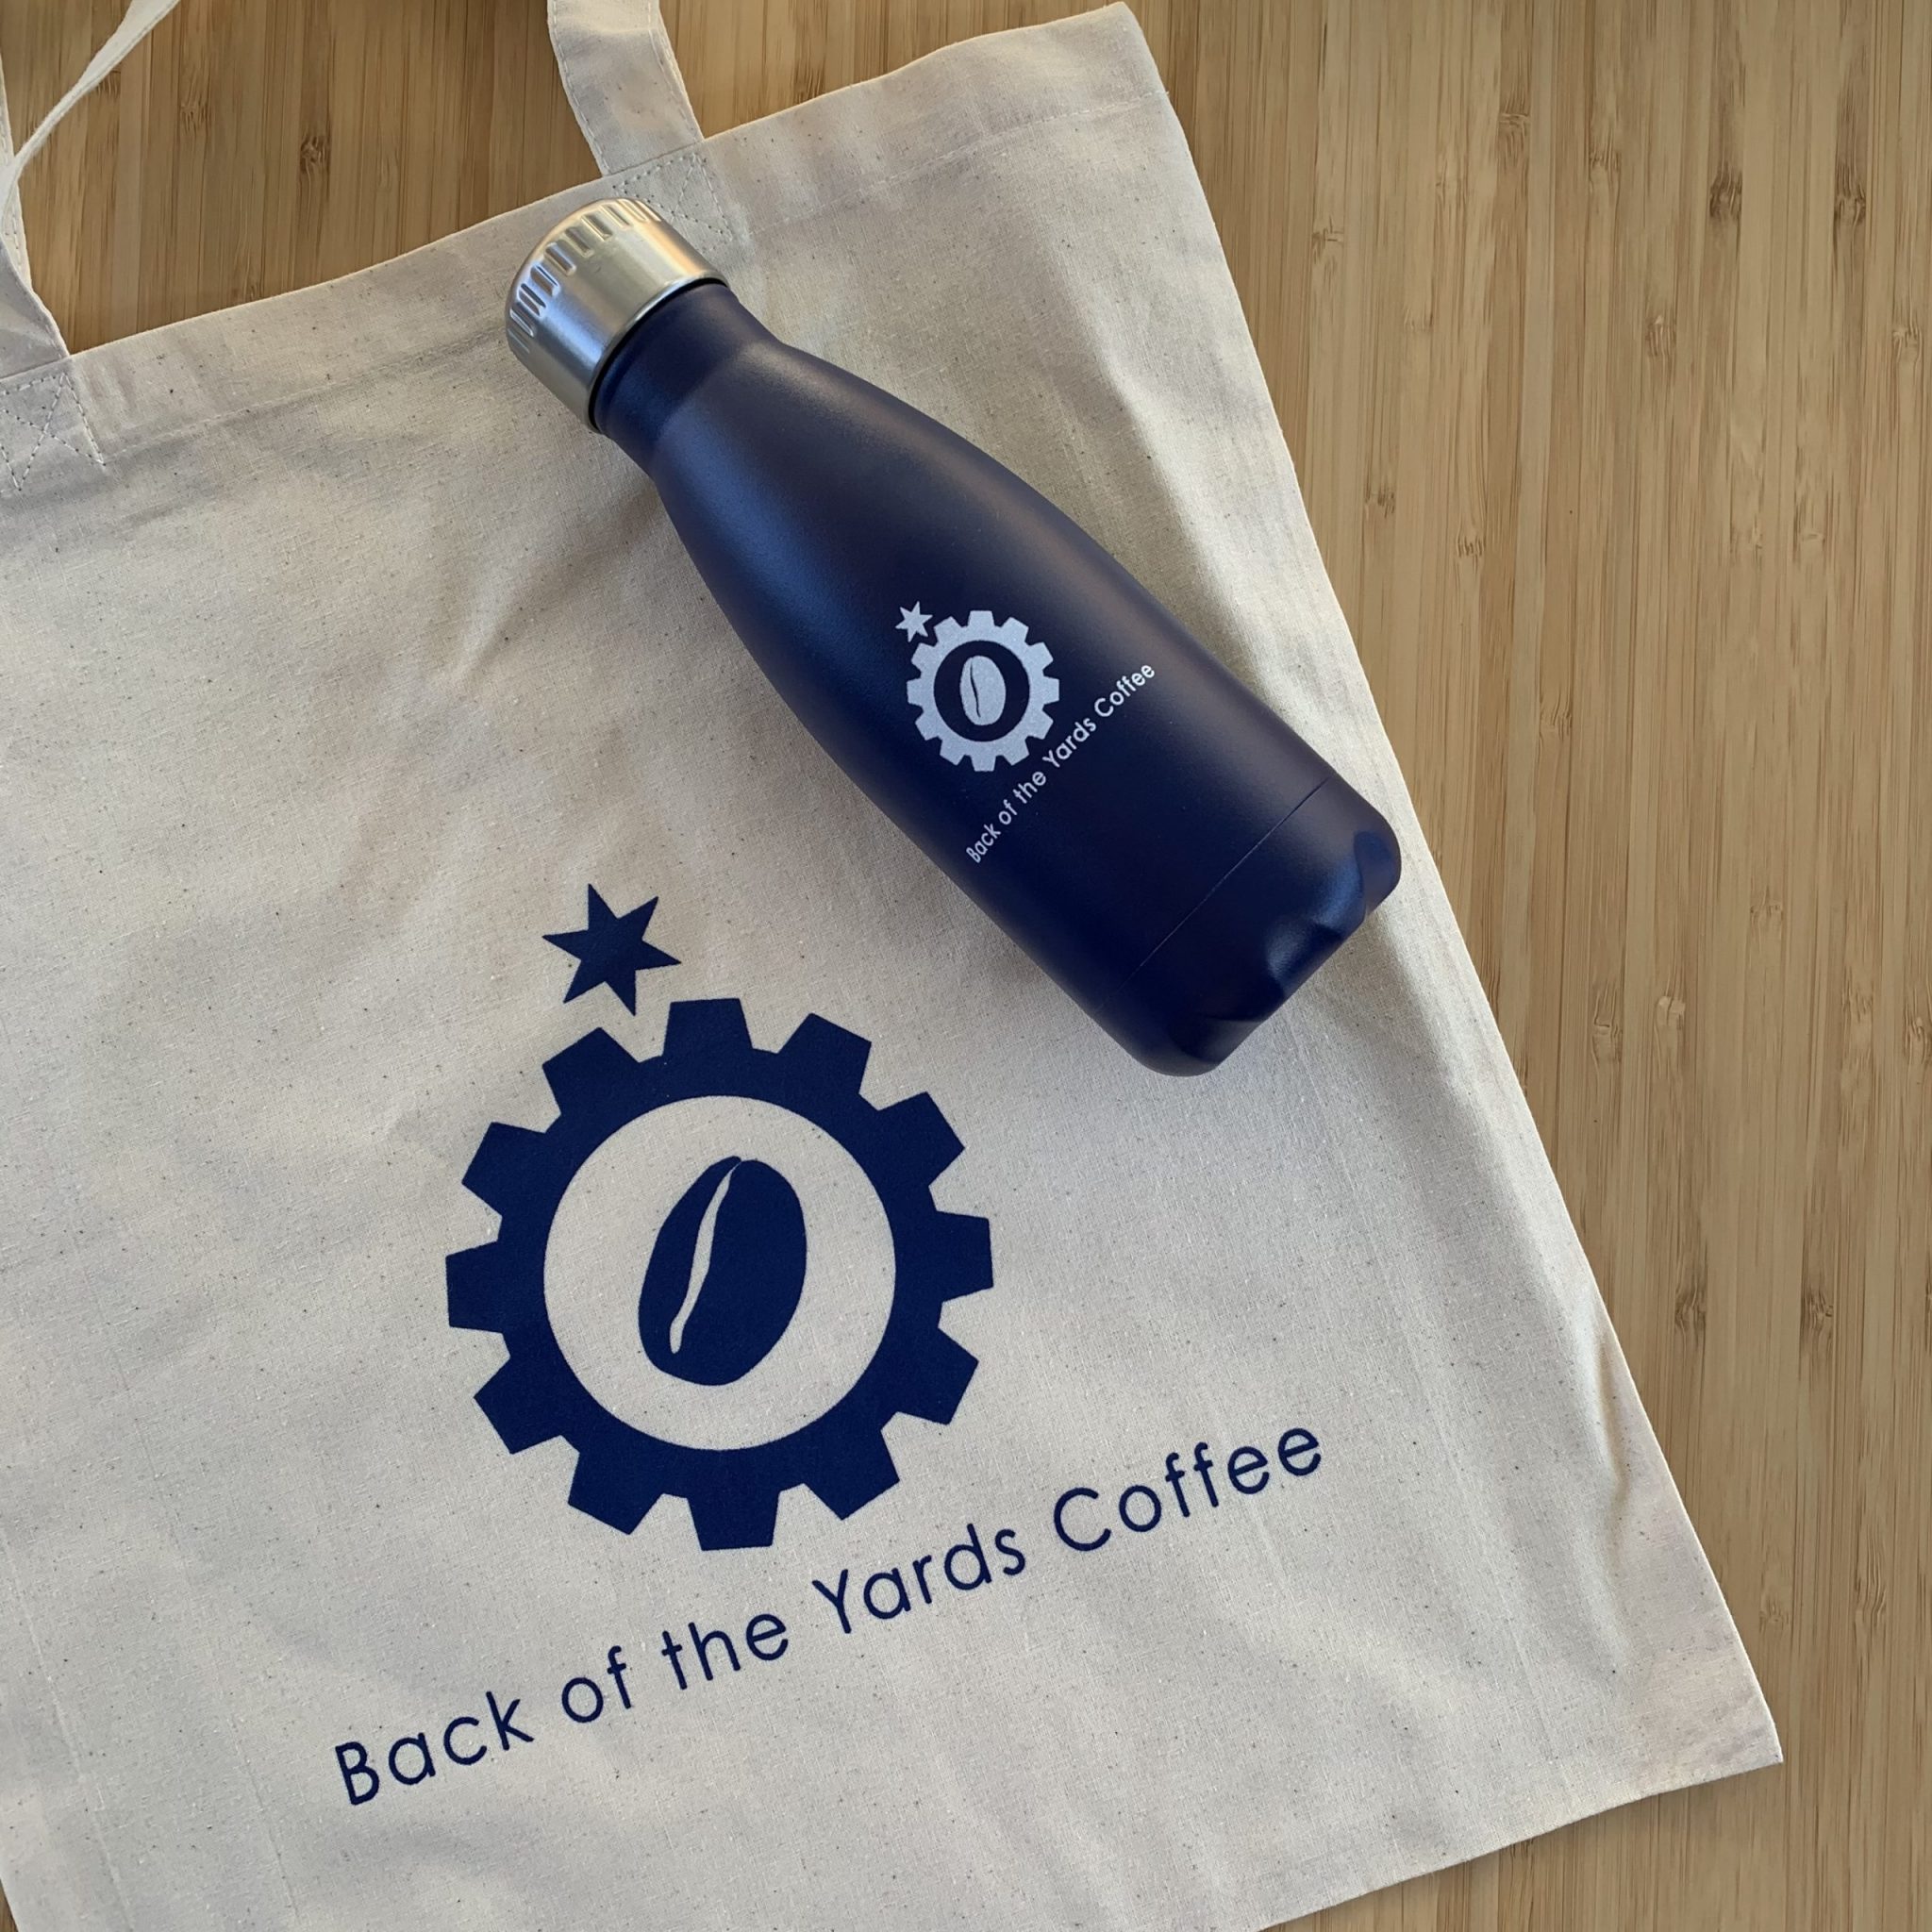 BOTY CoffeeHouse Tote Bag & Water Bottle